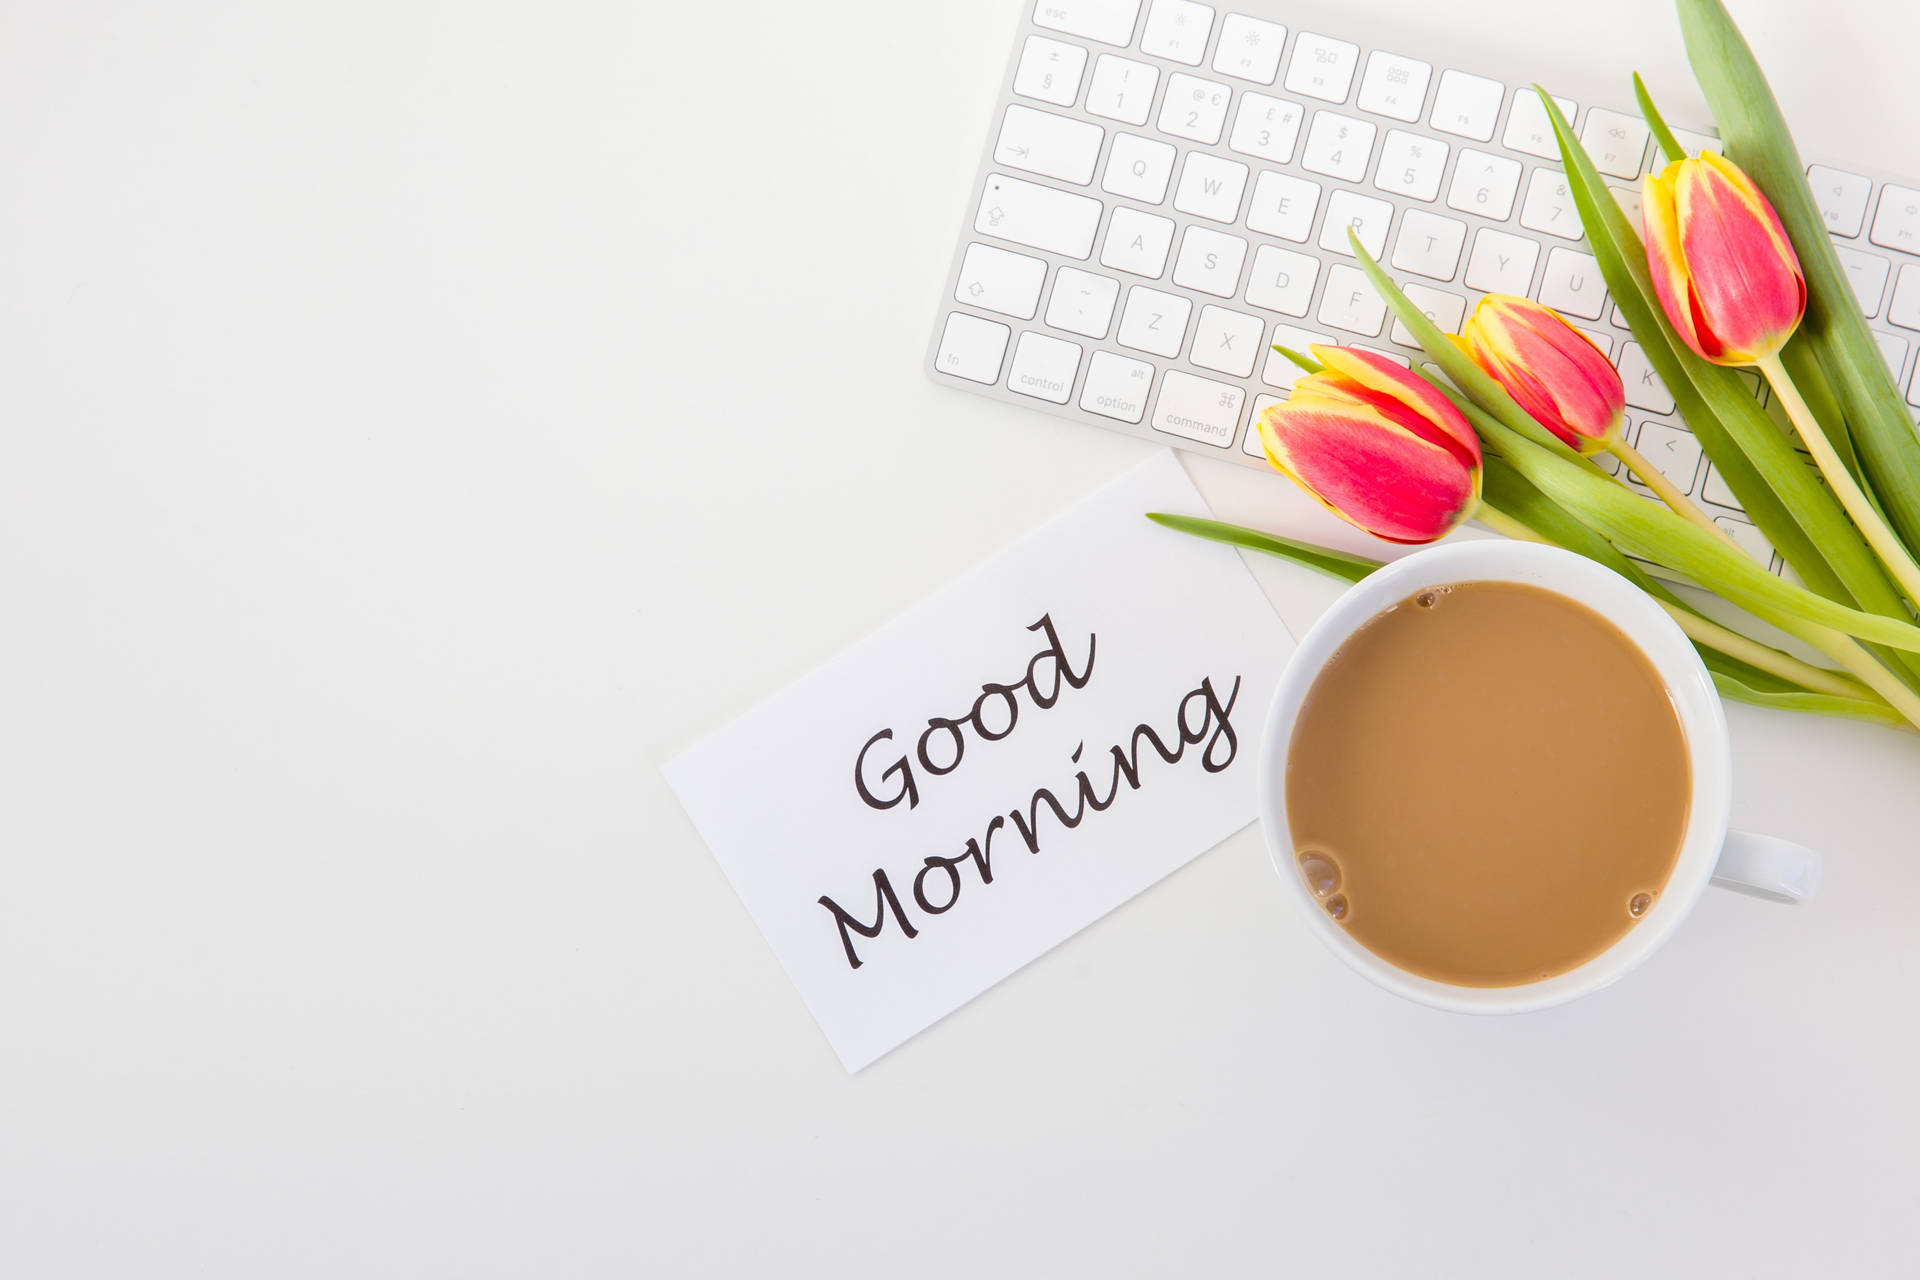 Good Morning On A White Desk With A Cup Of Coffee And Tulips Background